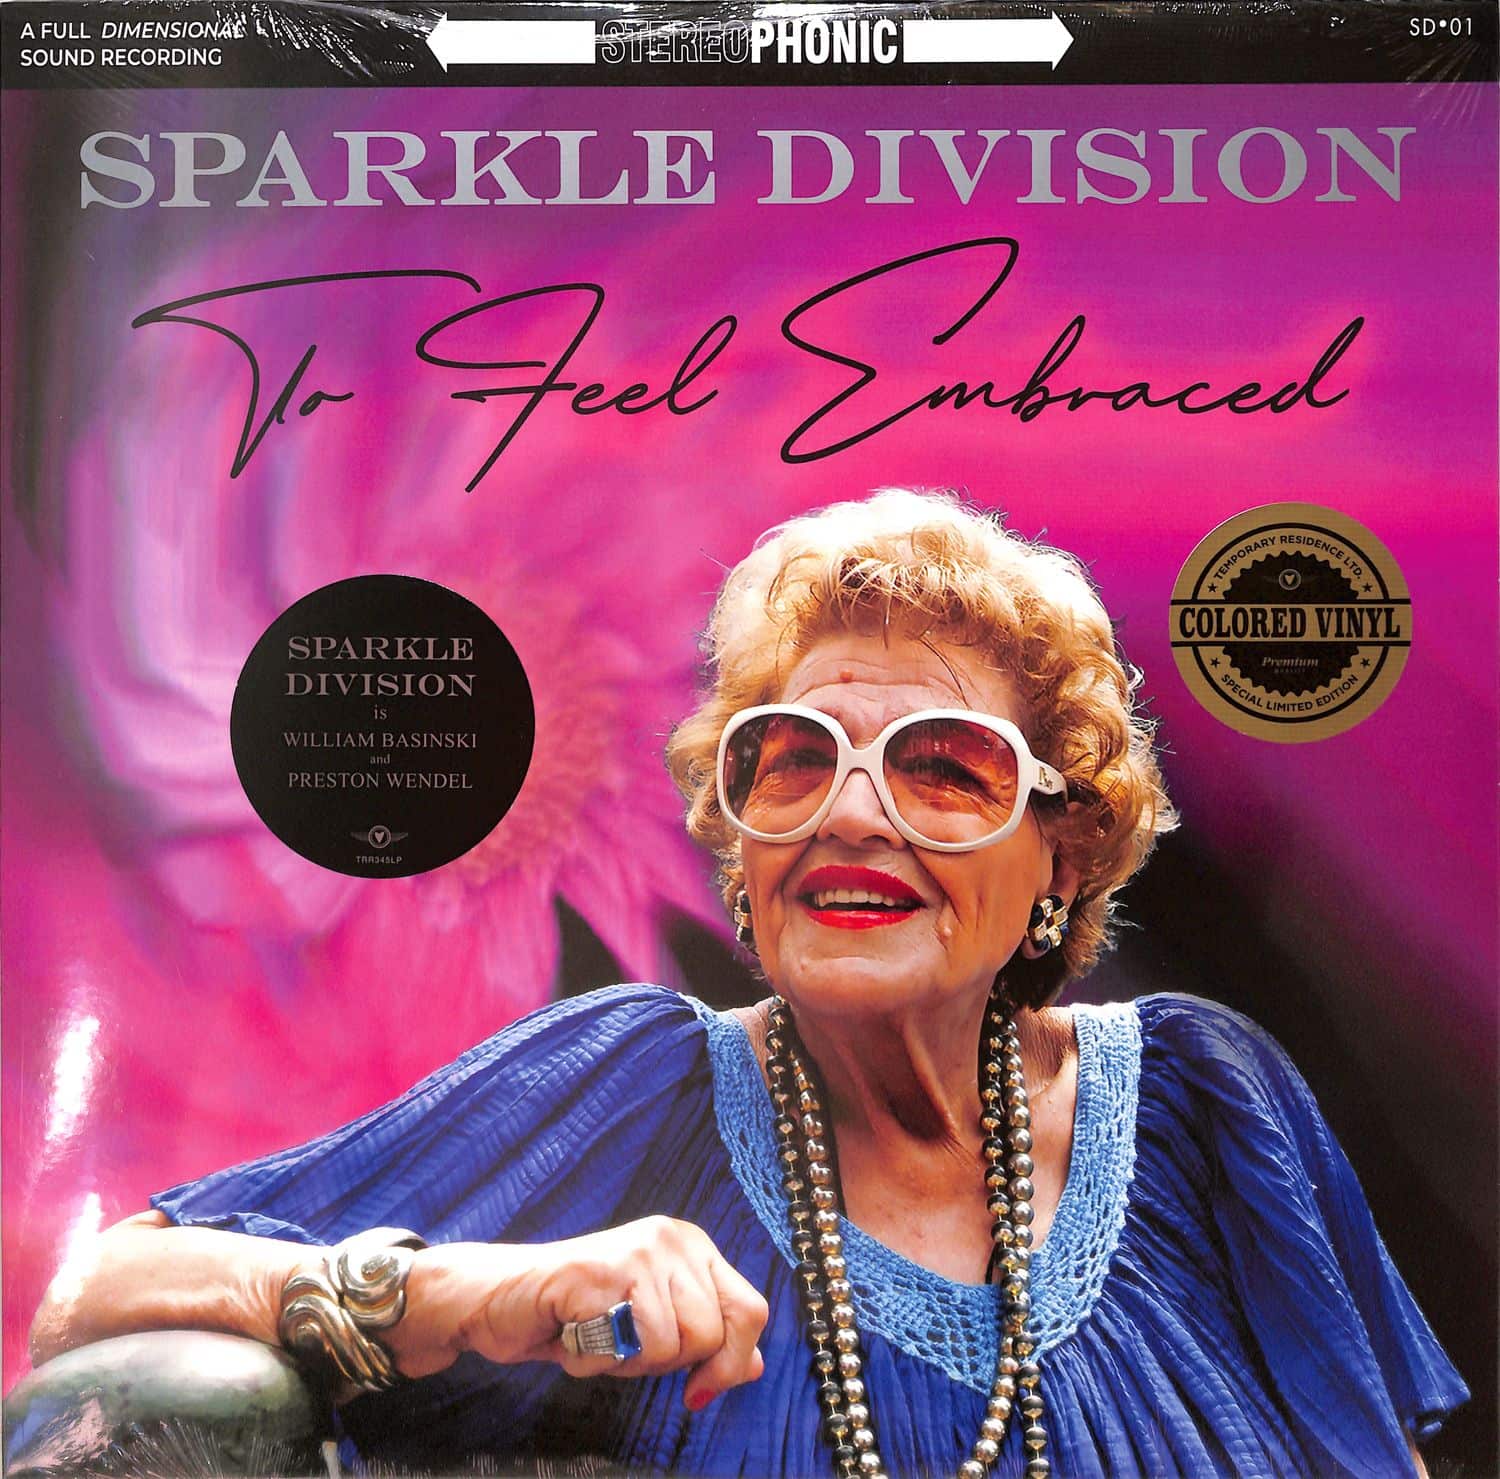 Sparkle Division - TO FEEL EMBRACED 